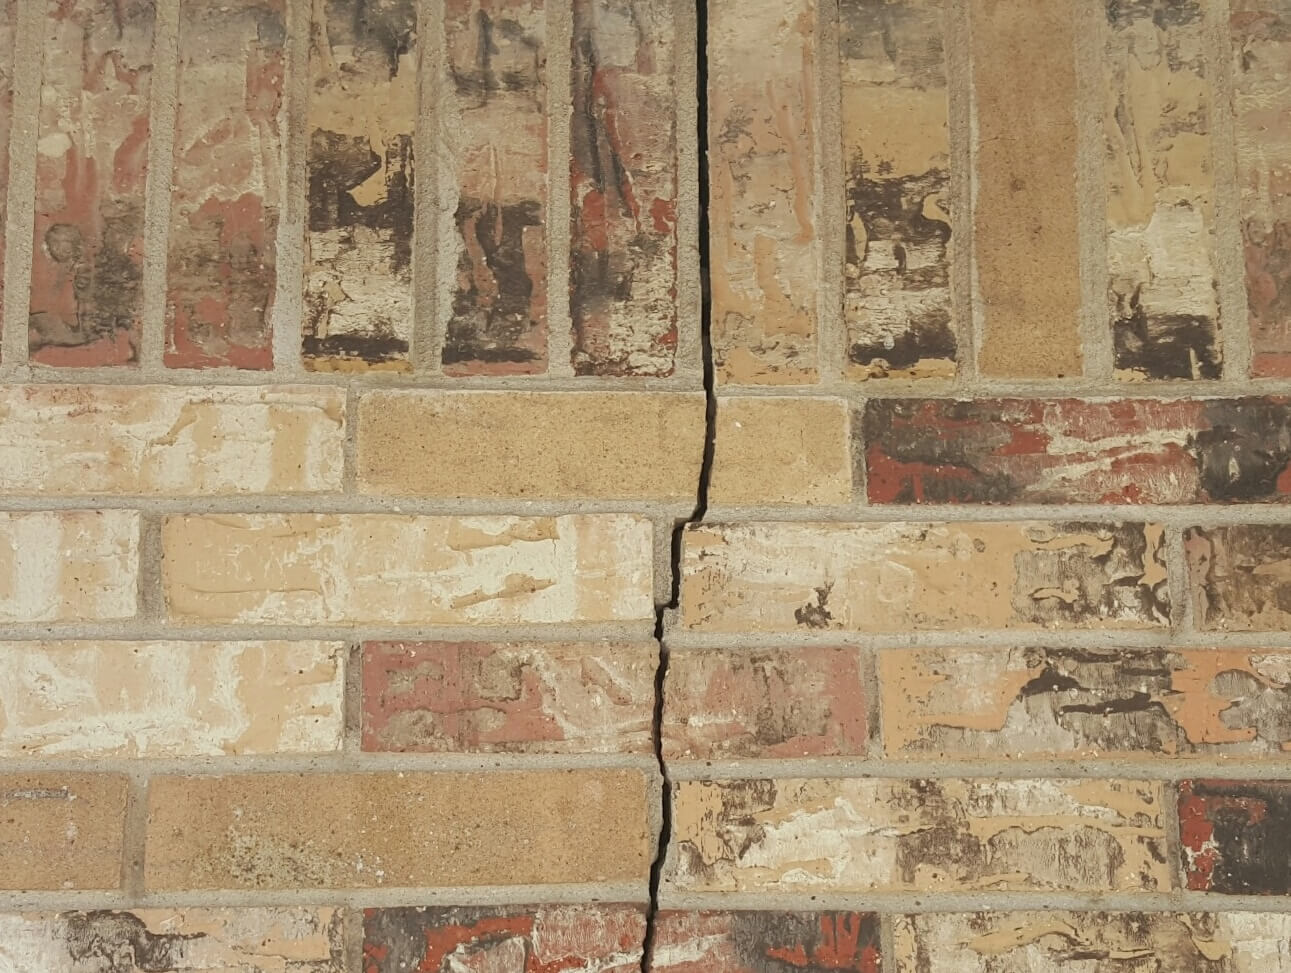 foundation damage is a structural issue.